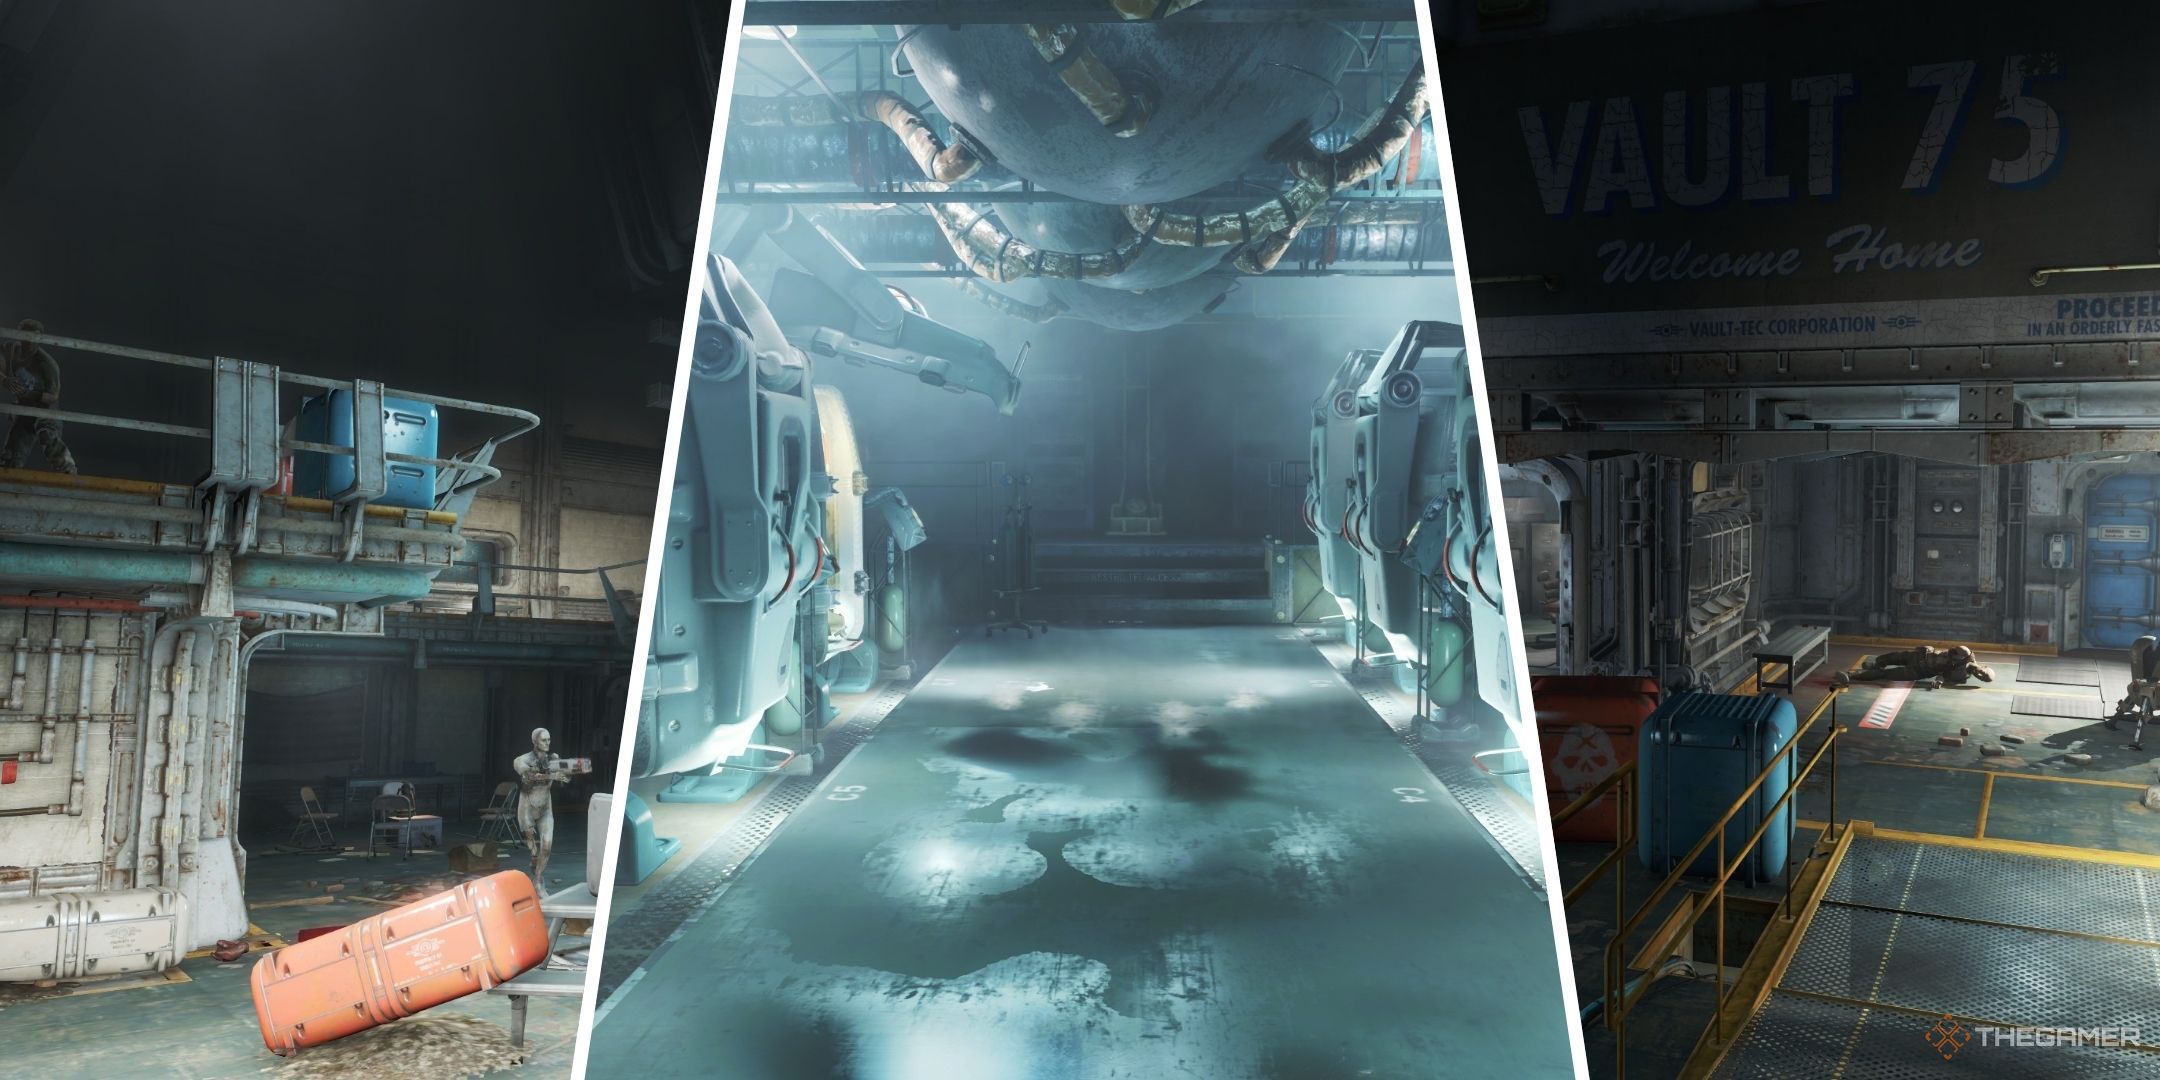 Fallout 4 split image of a vault with synths fighting, vault 111 cryopods, and vault 75s main control room